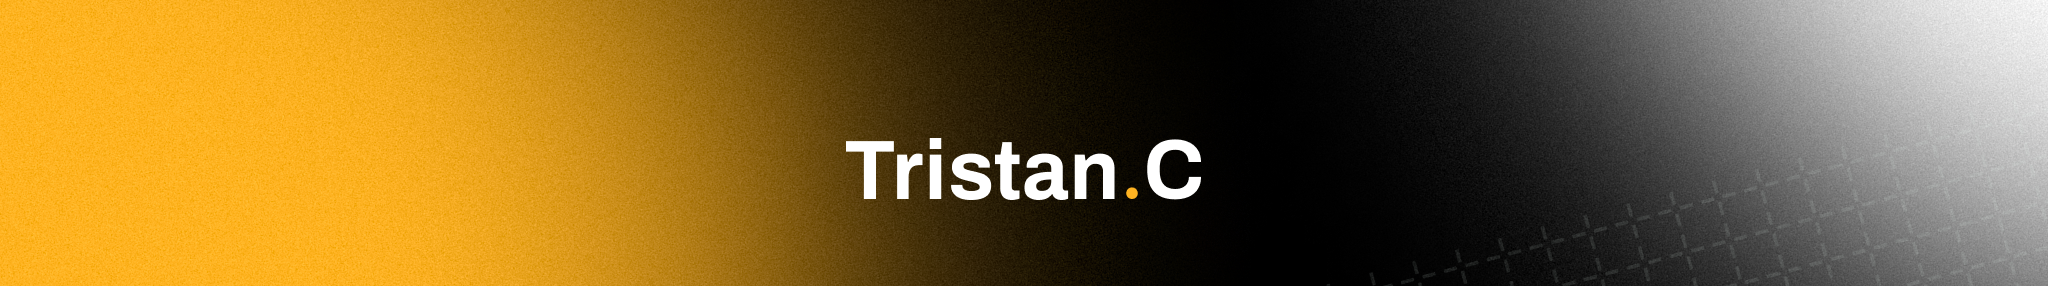 Tristan Coulombe's profile banner